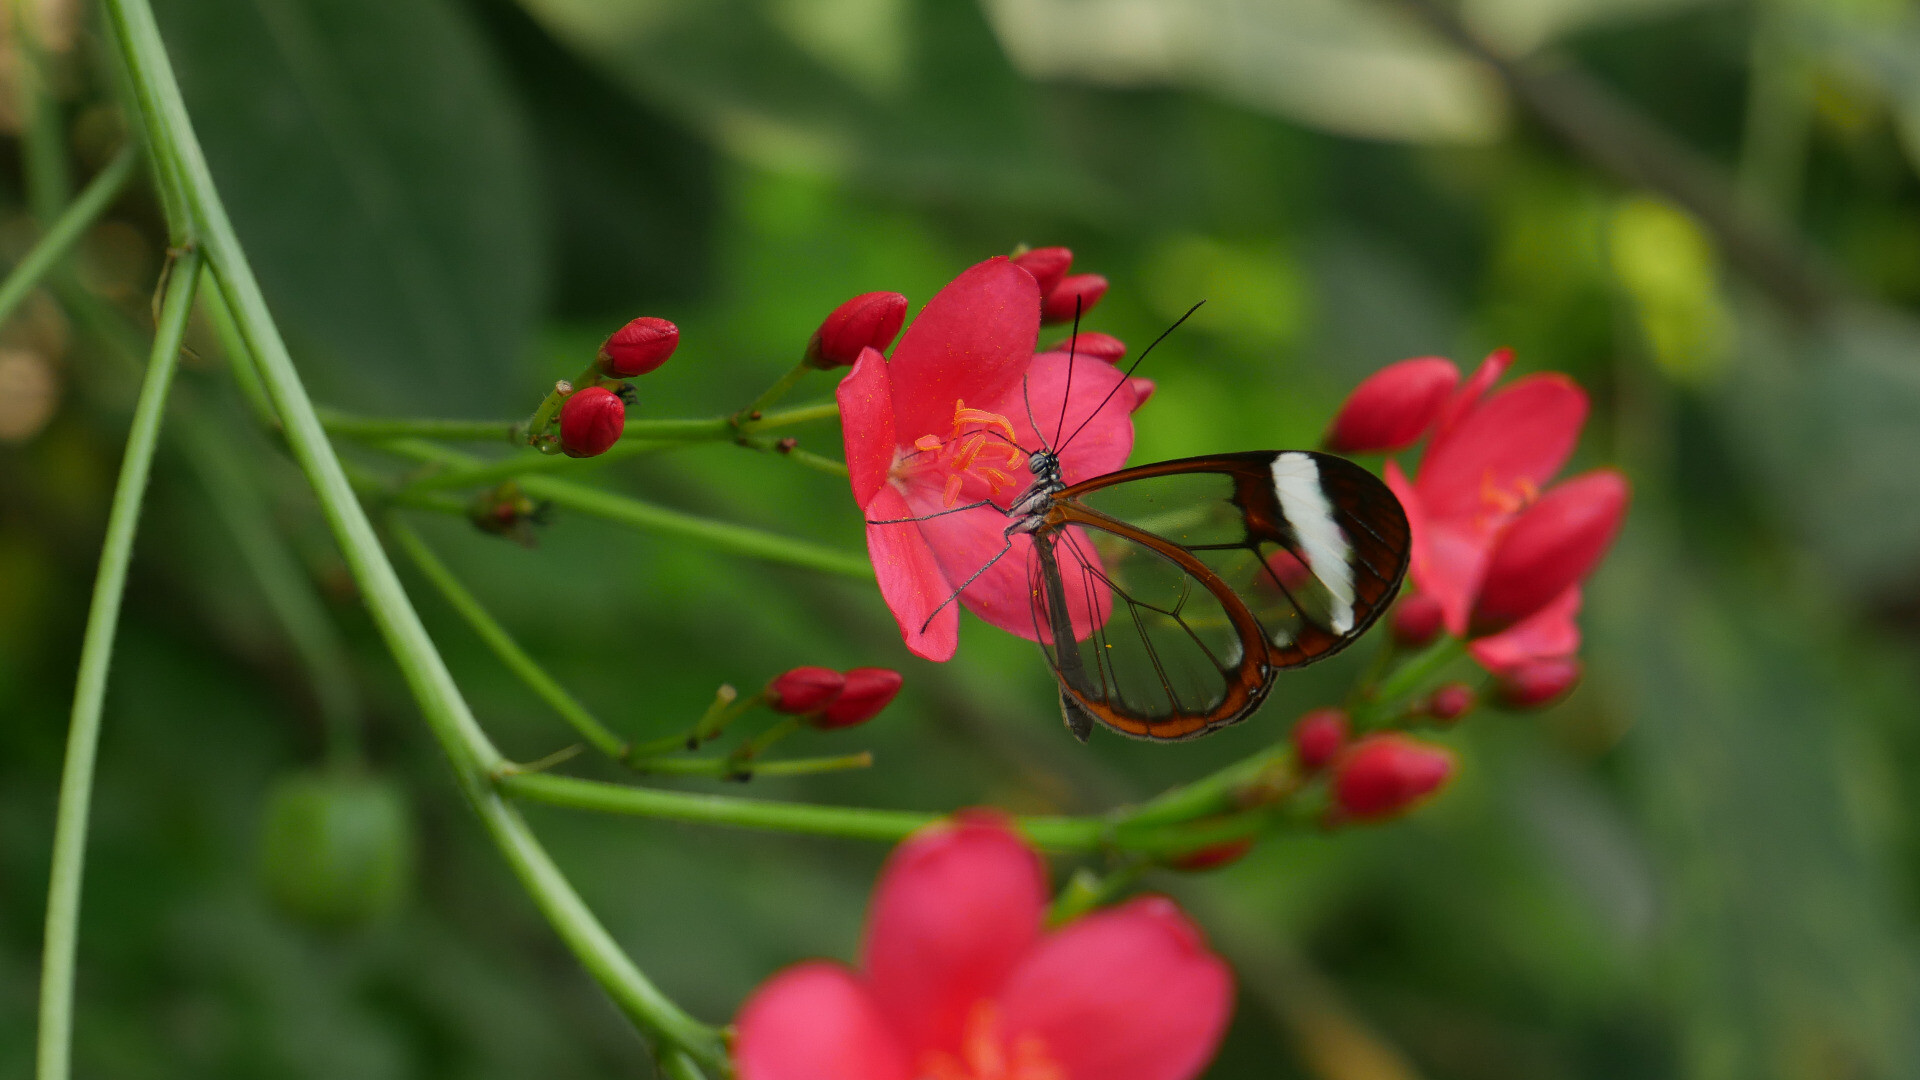 a tropical glasswing butterfly on a red flower